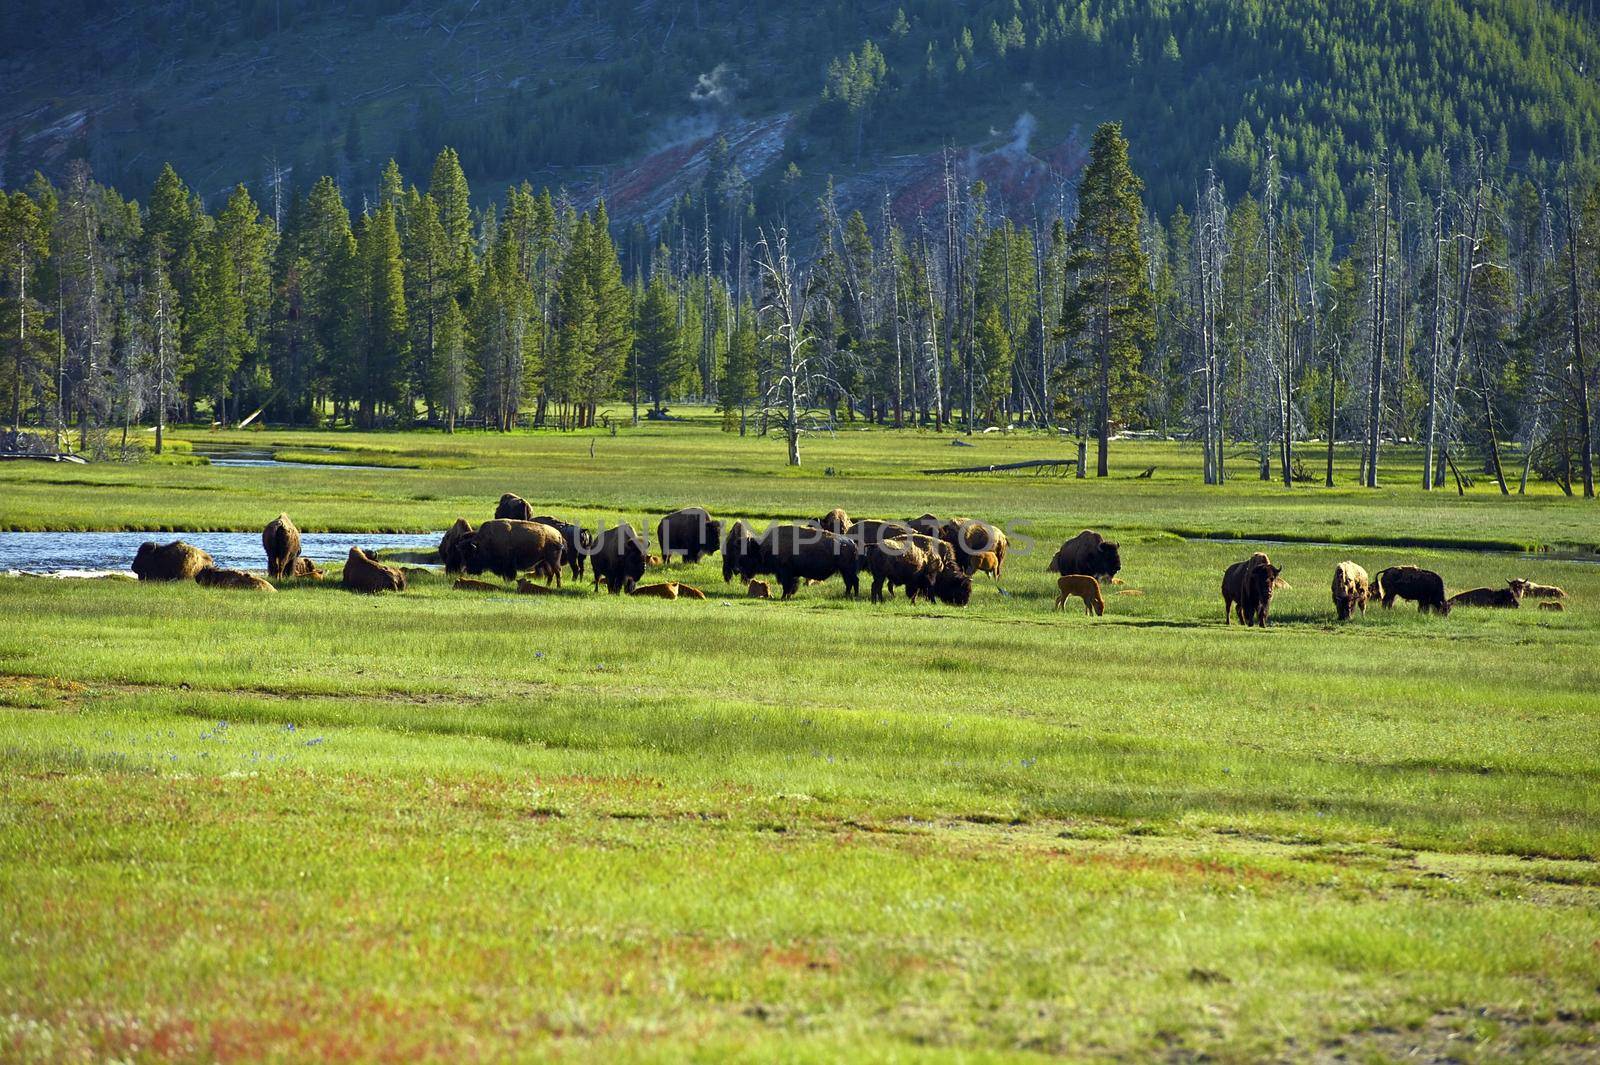 American Buffalo in Yellowstone National Park. North American Wildlife Photo Collection. by welcomia